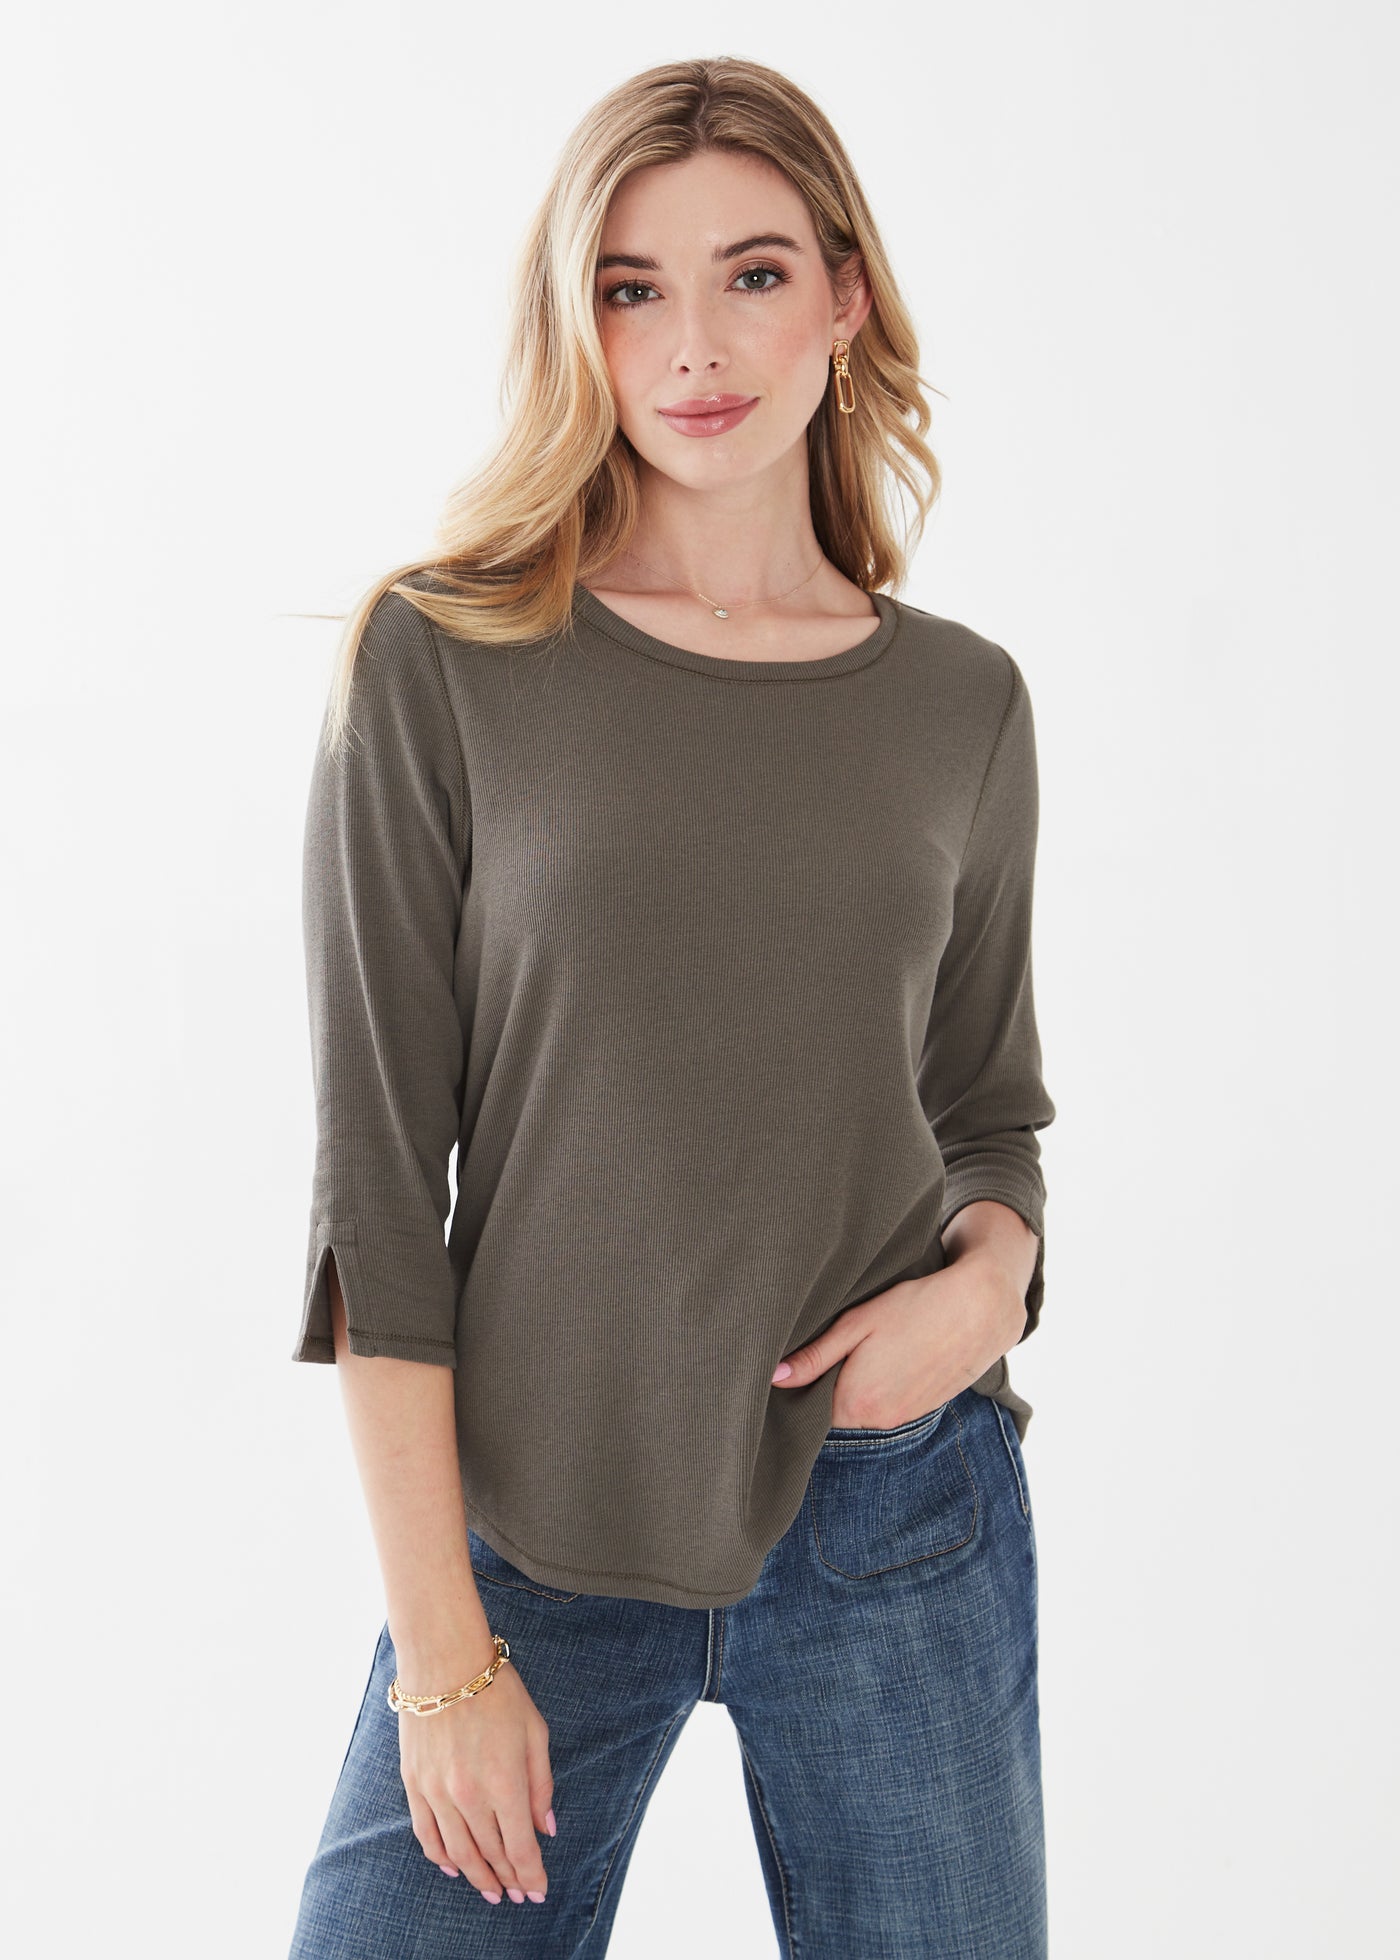 French Dressing Jeans 3/4 Sleeve Scoop Neck Top 